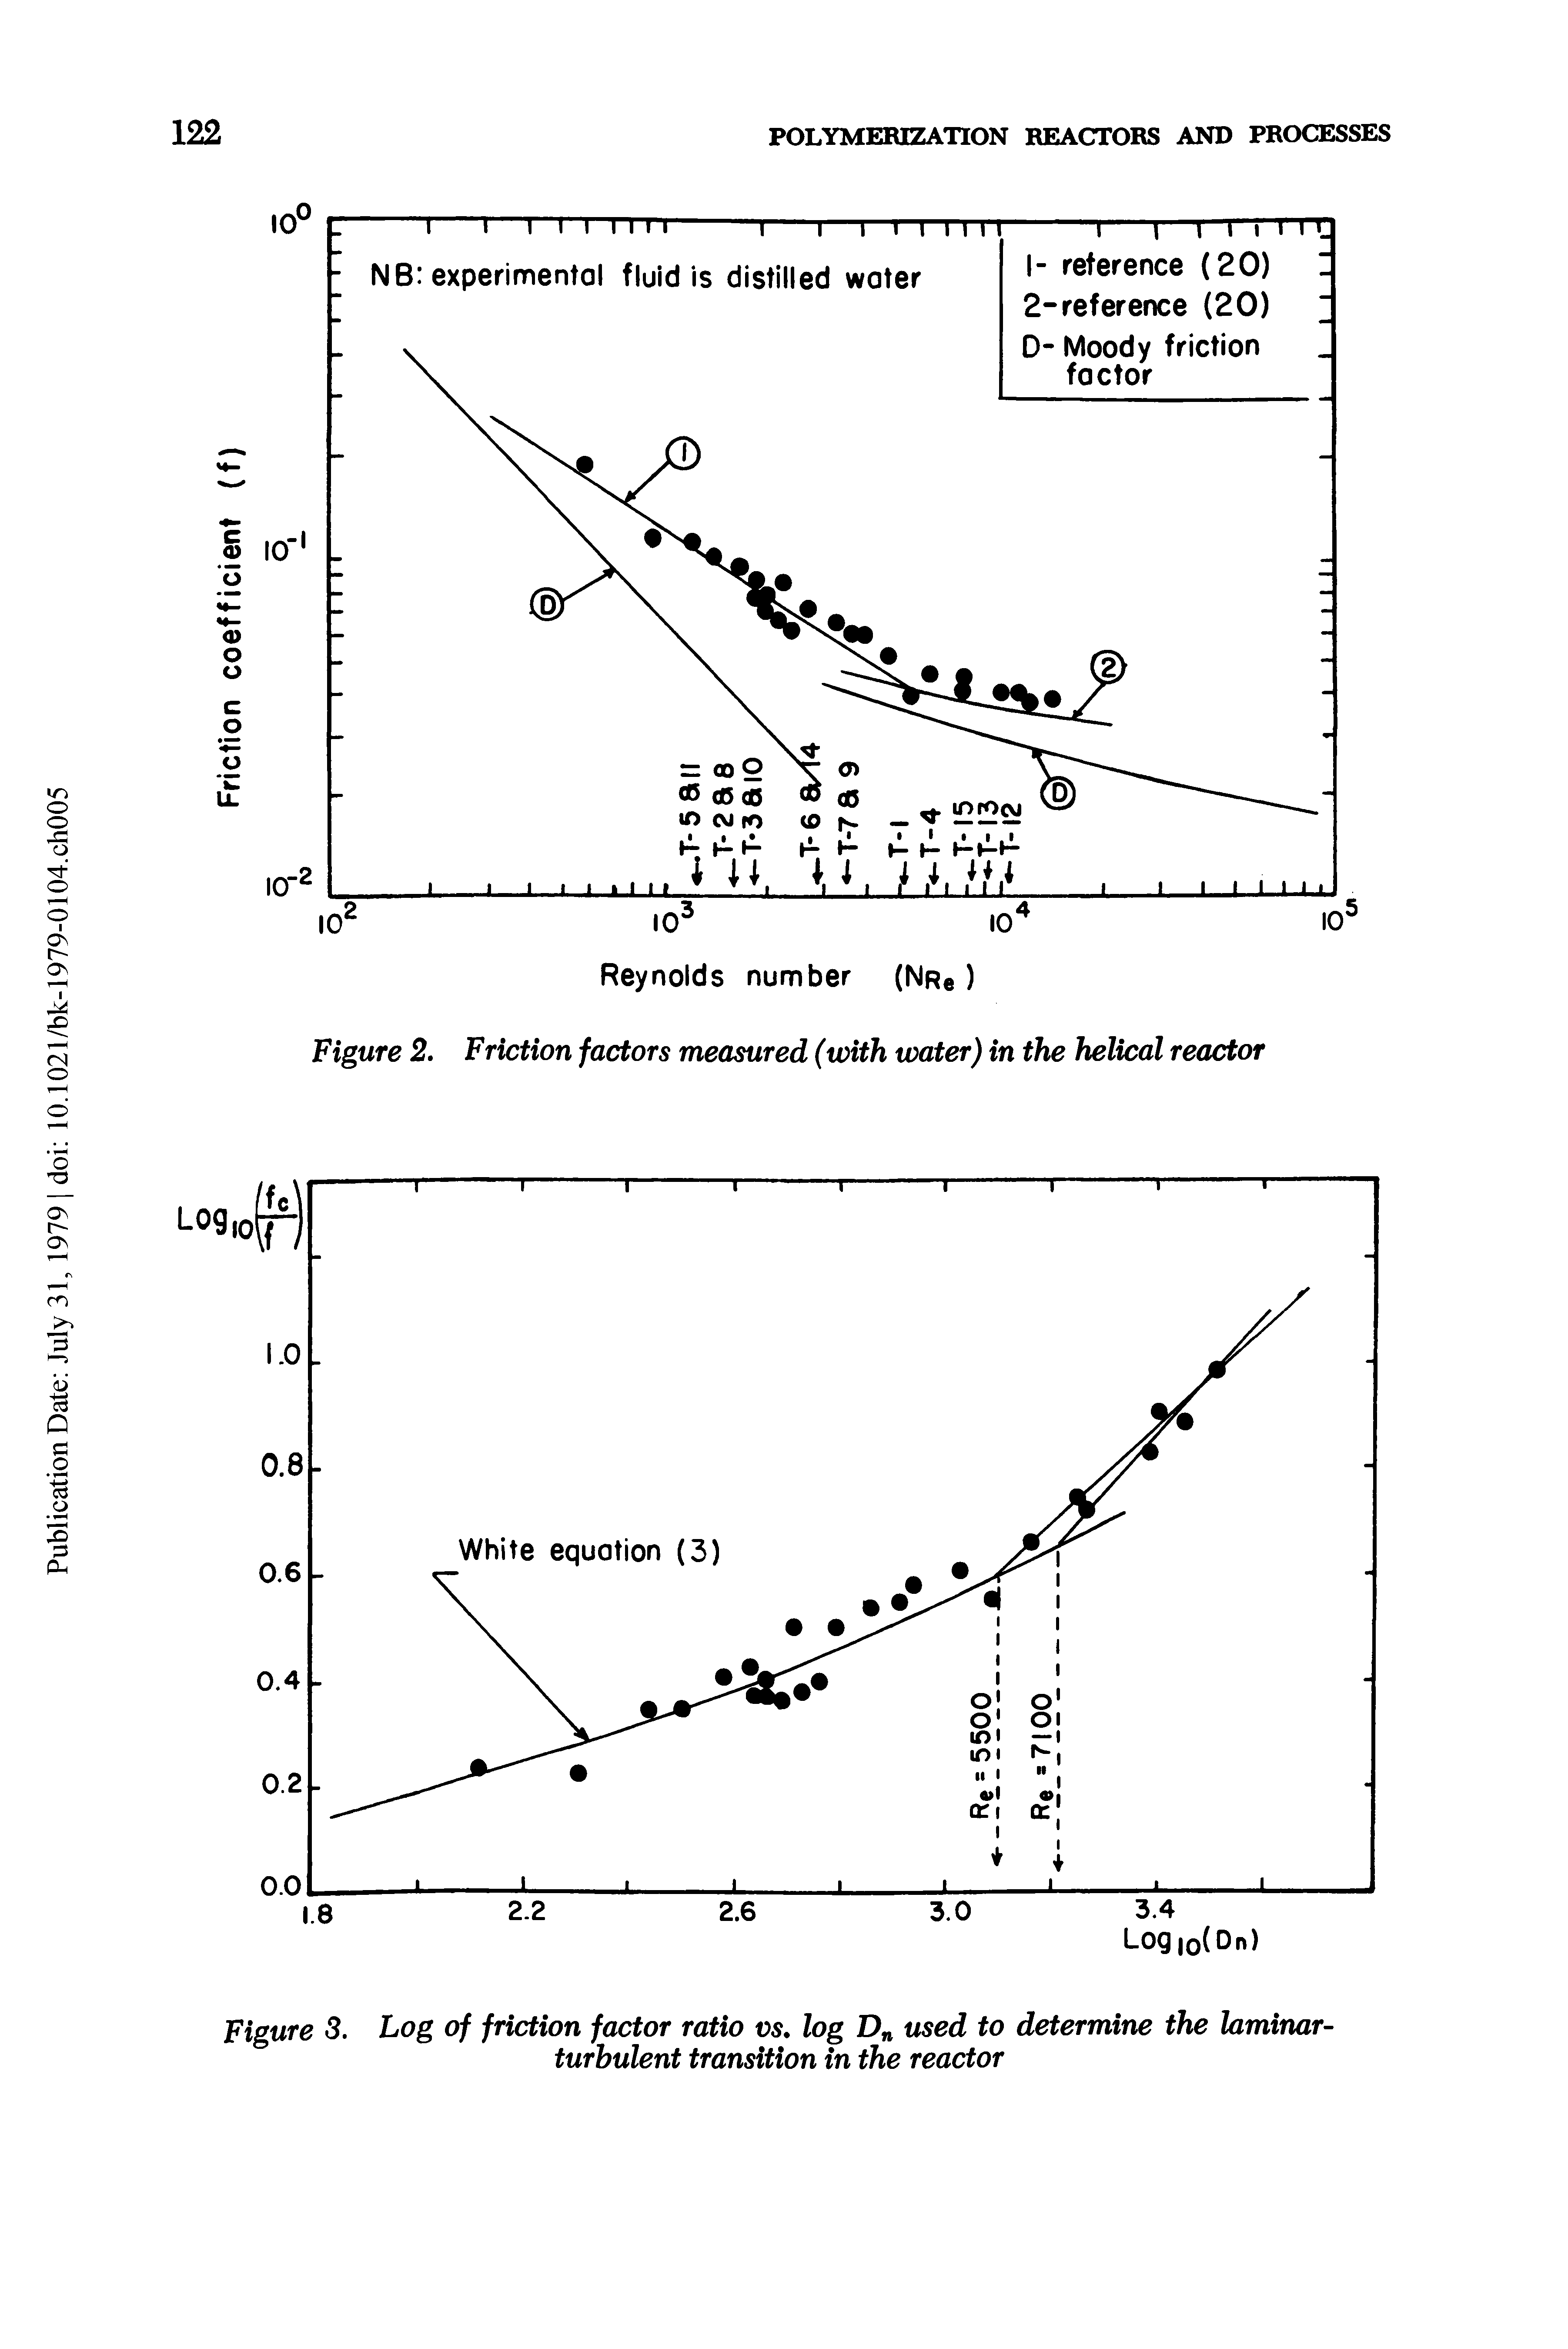 Figure 3. Log of friction factor ratio vs, log D used to determine the laminar-turbulent transition in the reactor...